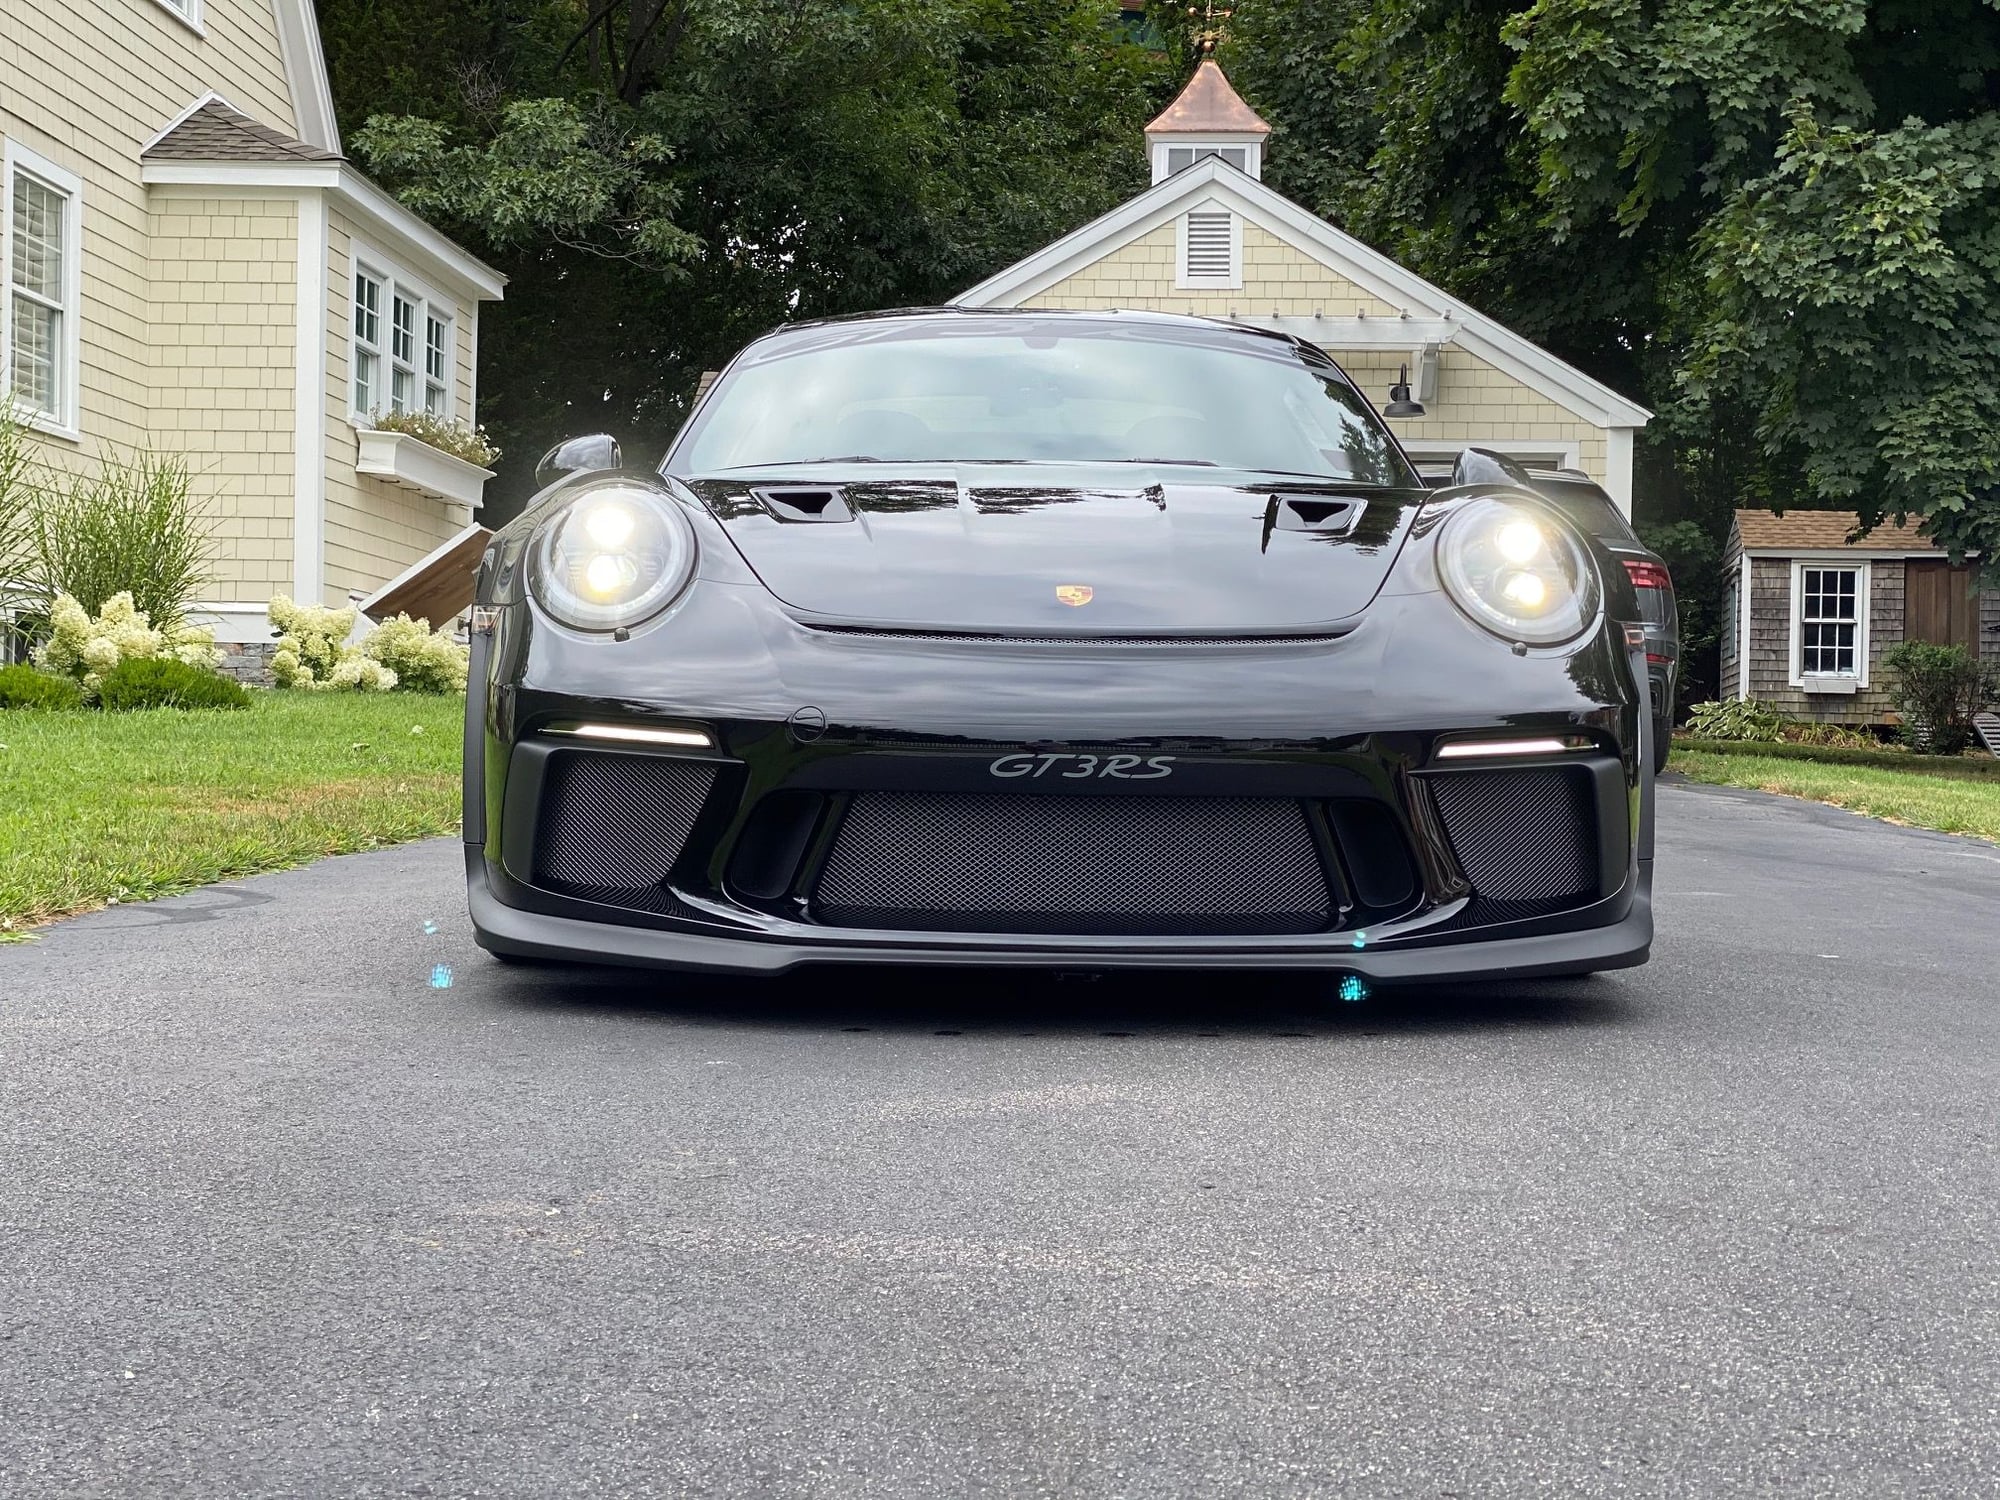 2019 Porsche GT3 - 'Finest GT3 RS in the country' - putting out feelers .2 GT3RS - Used - VIN WPOAF2A96KS164579 - 3,700 Miles - 6 cyl - 2WD - Automatic - Coupe - Black - Dover, NH 03820, United States